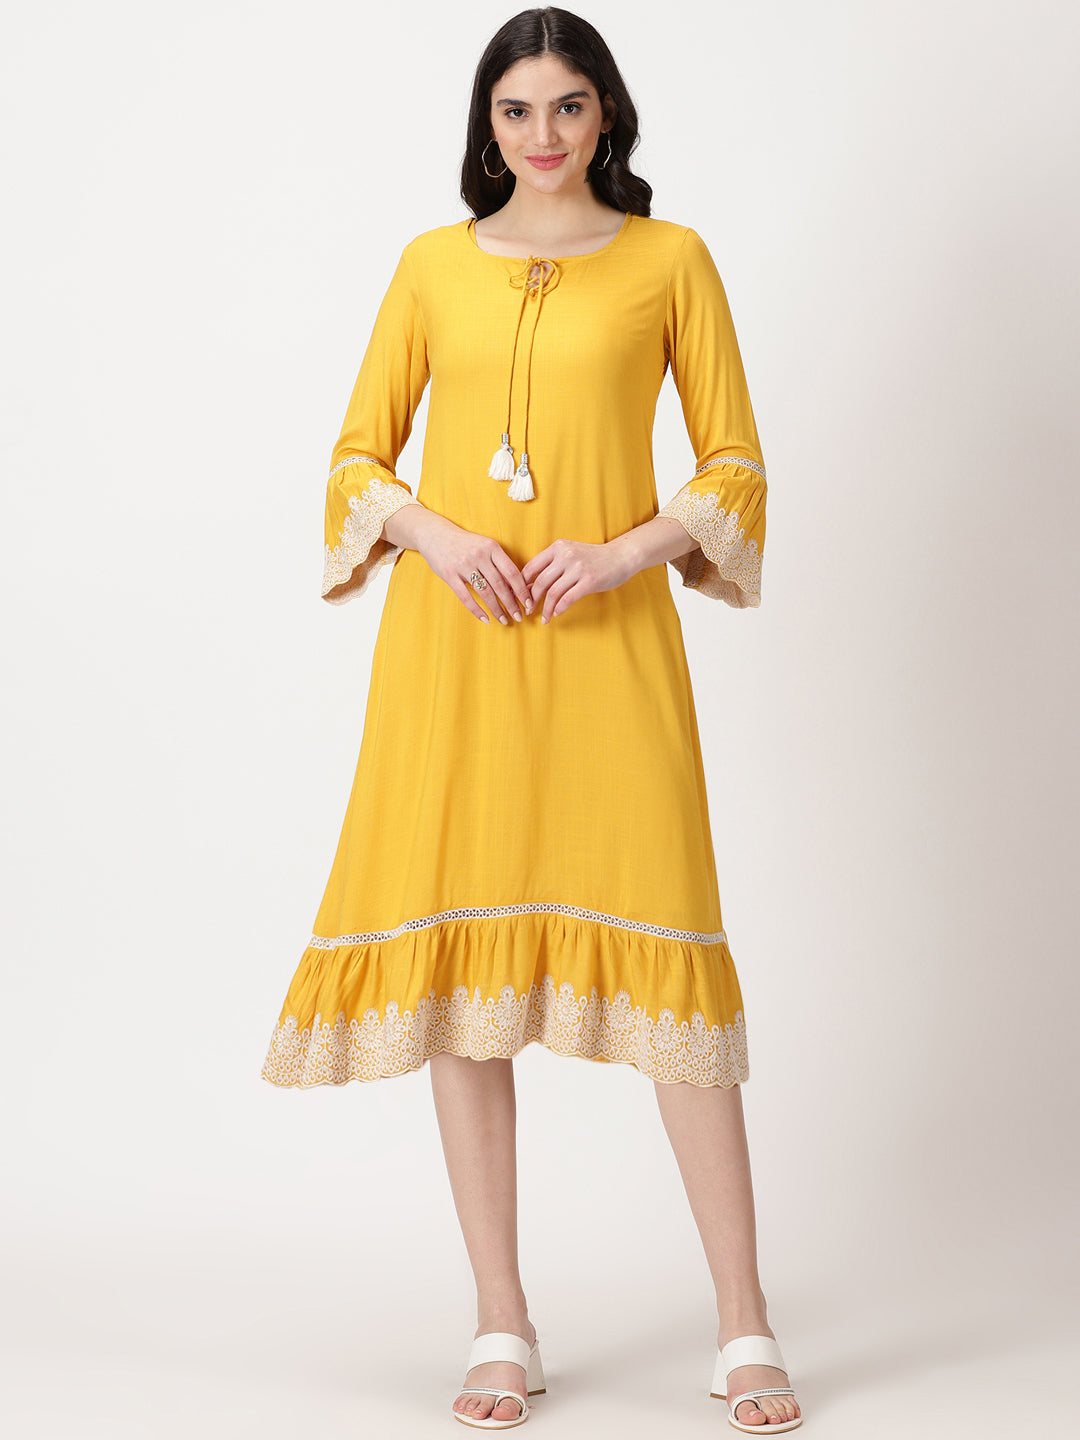 Yellow Rayon Slub Midi Dress with Lace Embroidered Details